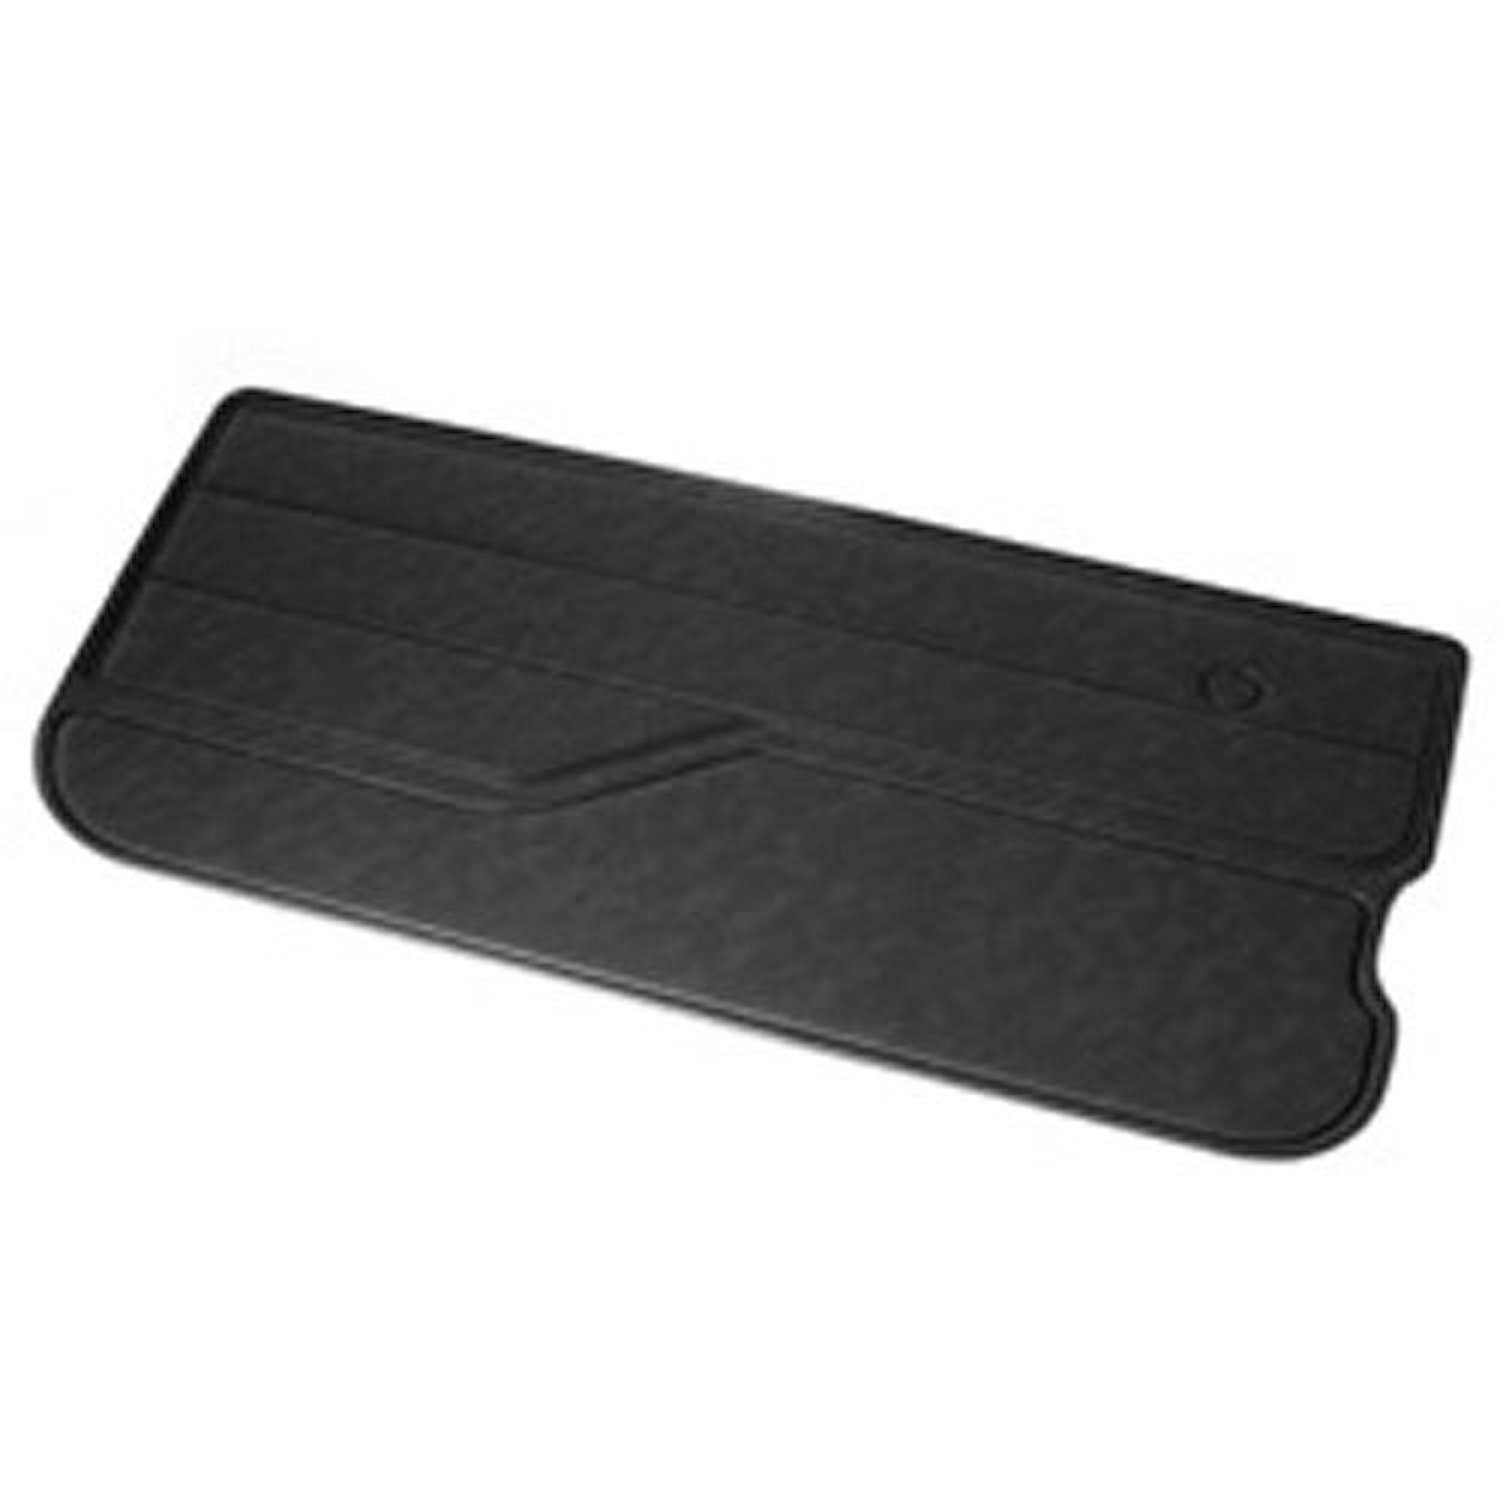 This black vinyl door panel from Omix-ADA fits the left door on 82-86 Jeep CJ7 and CJ8 as well as 87